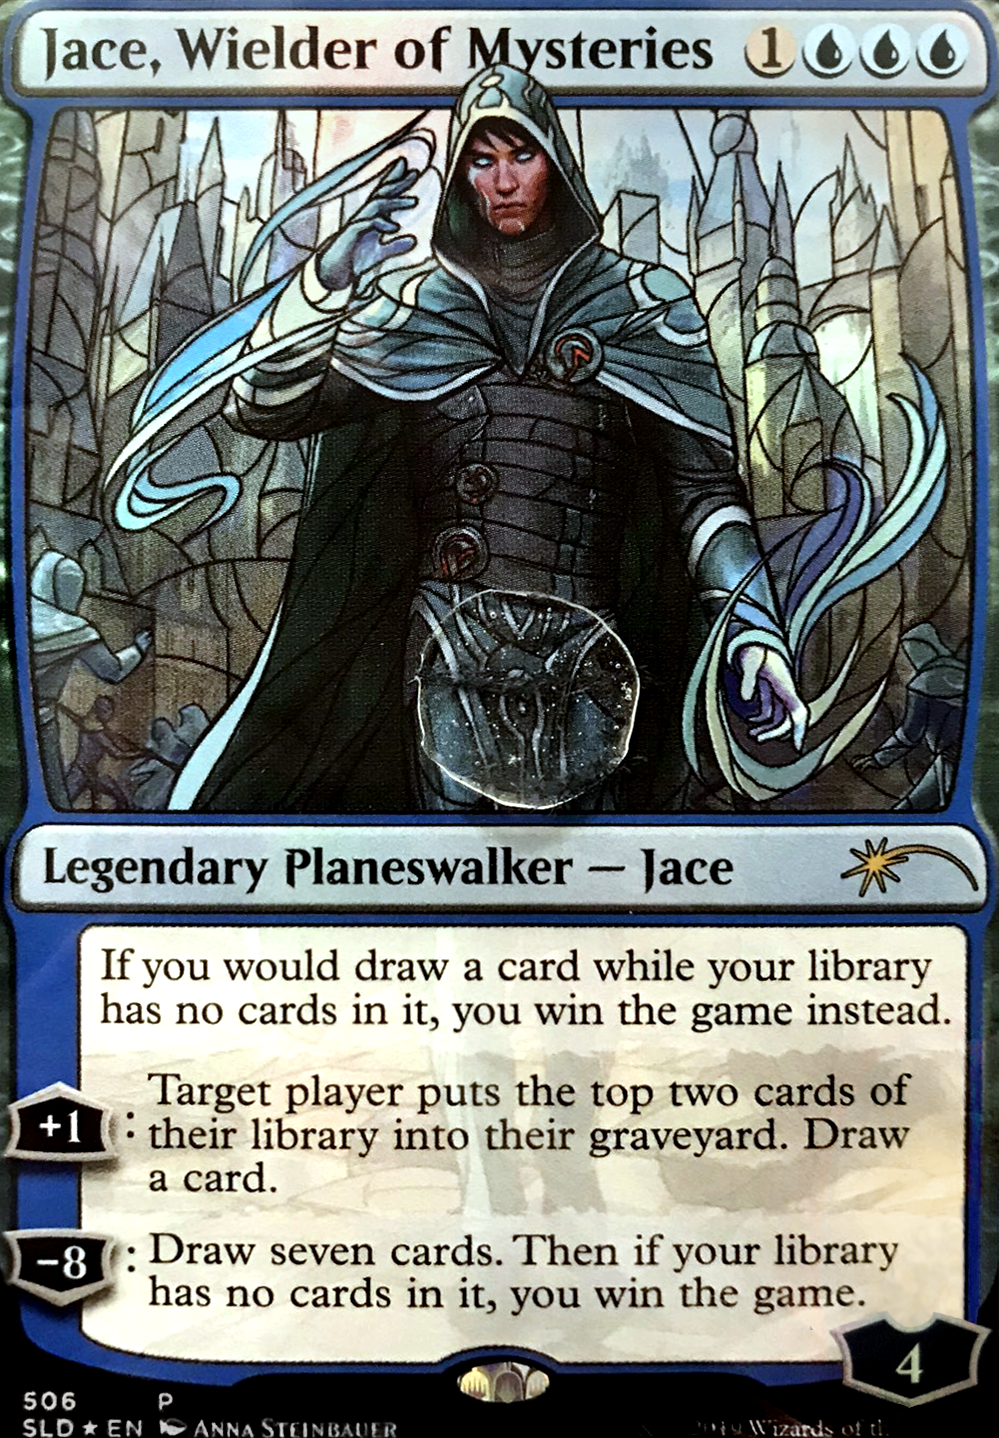 Jace, Wielder of Mysteries feature for Gross Men Card Collection